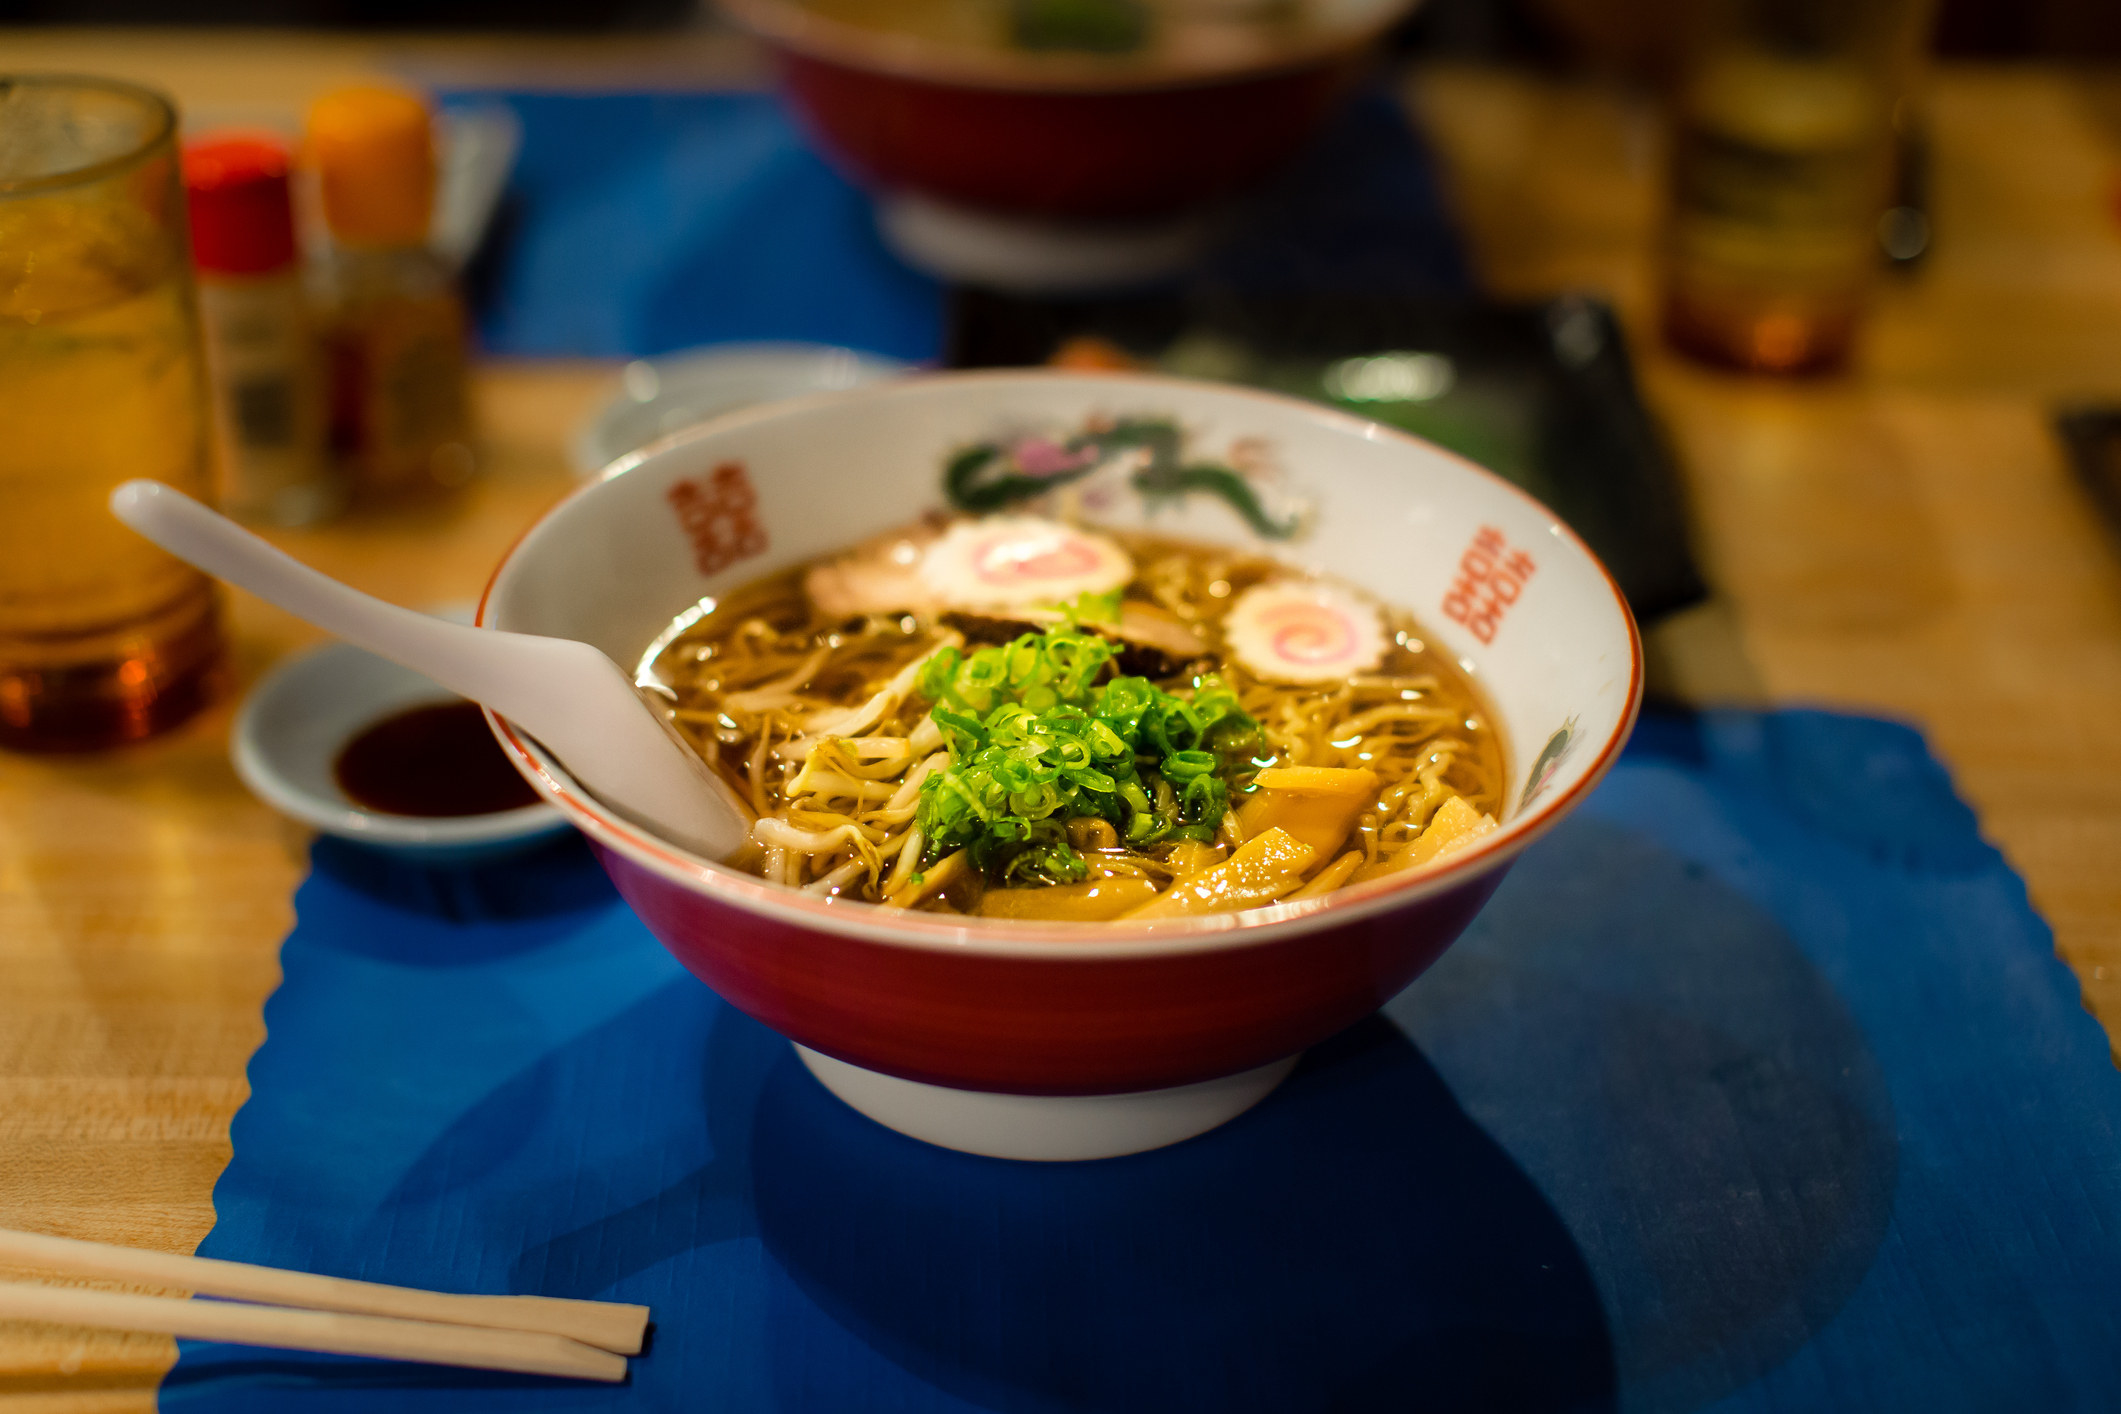 A bowl of traditional Japanese ramen noodles in a Tokyo restaurant